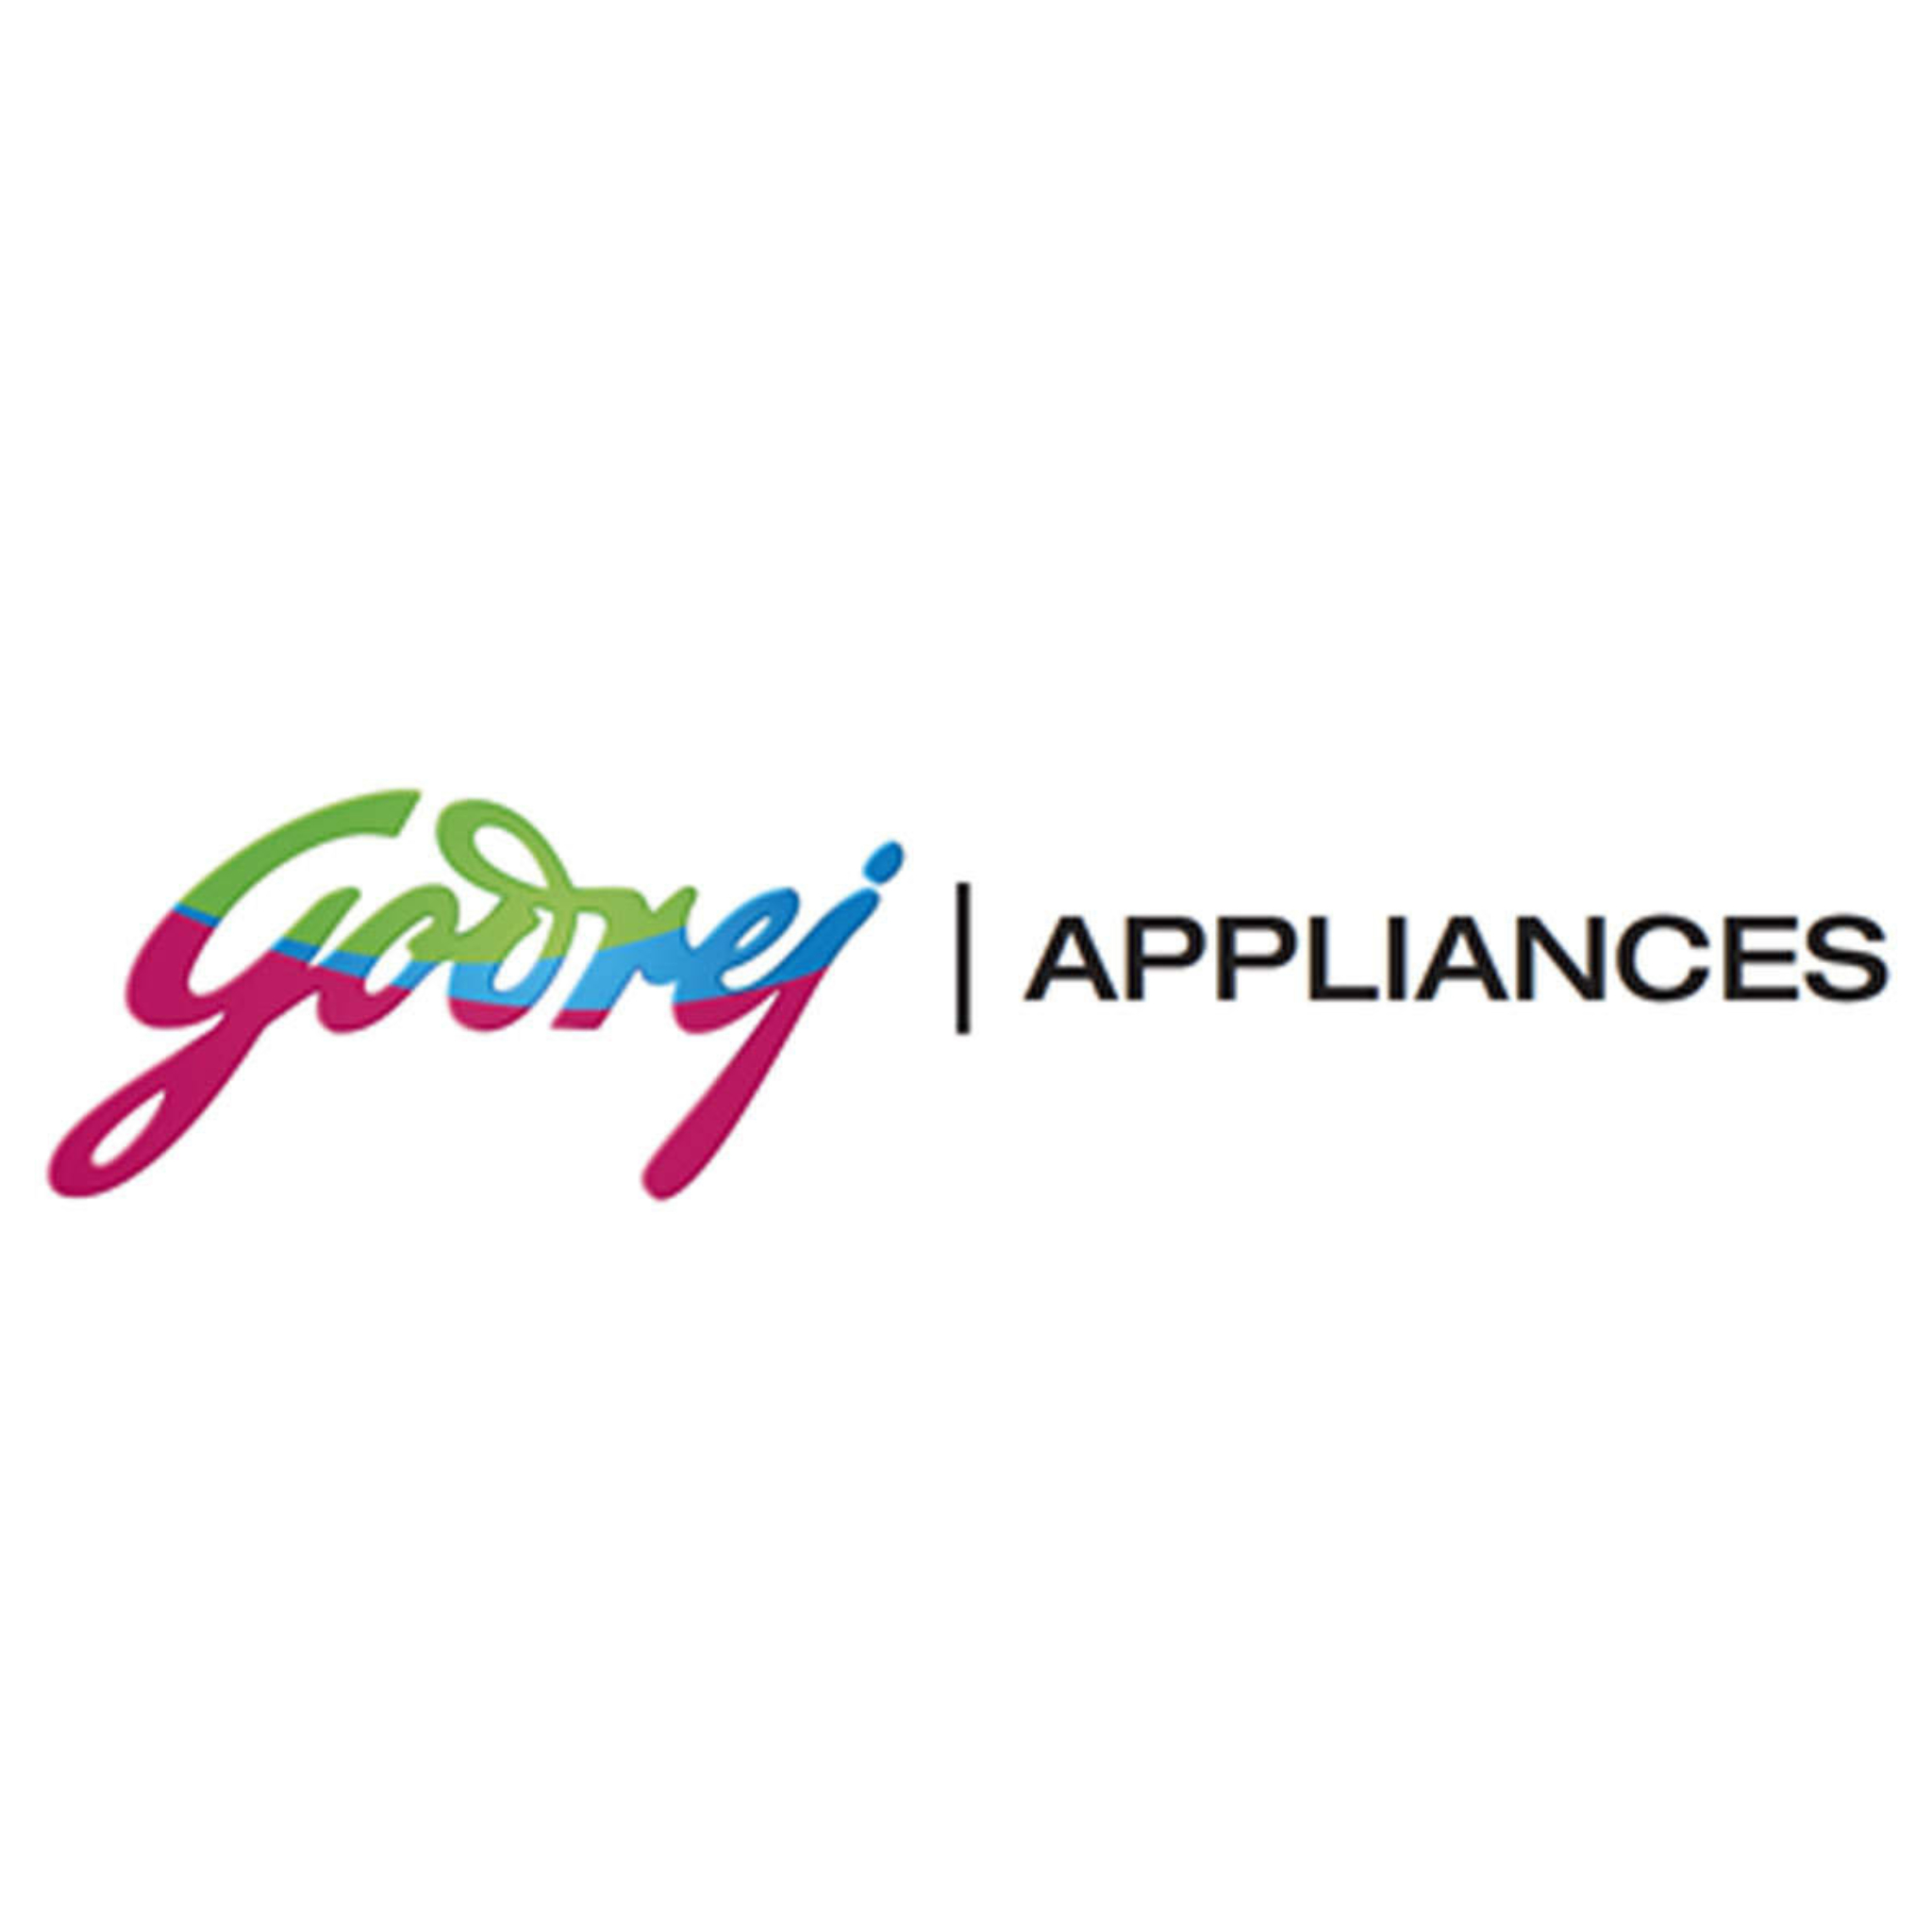 Godrej Appliances launches a slew of premium products to drive 50% + growth this festive season-thumnail